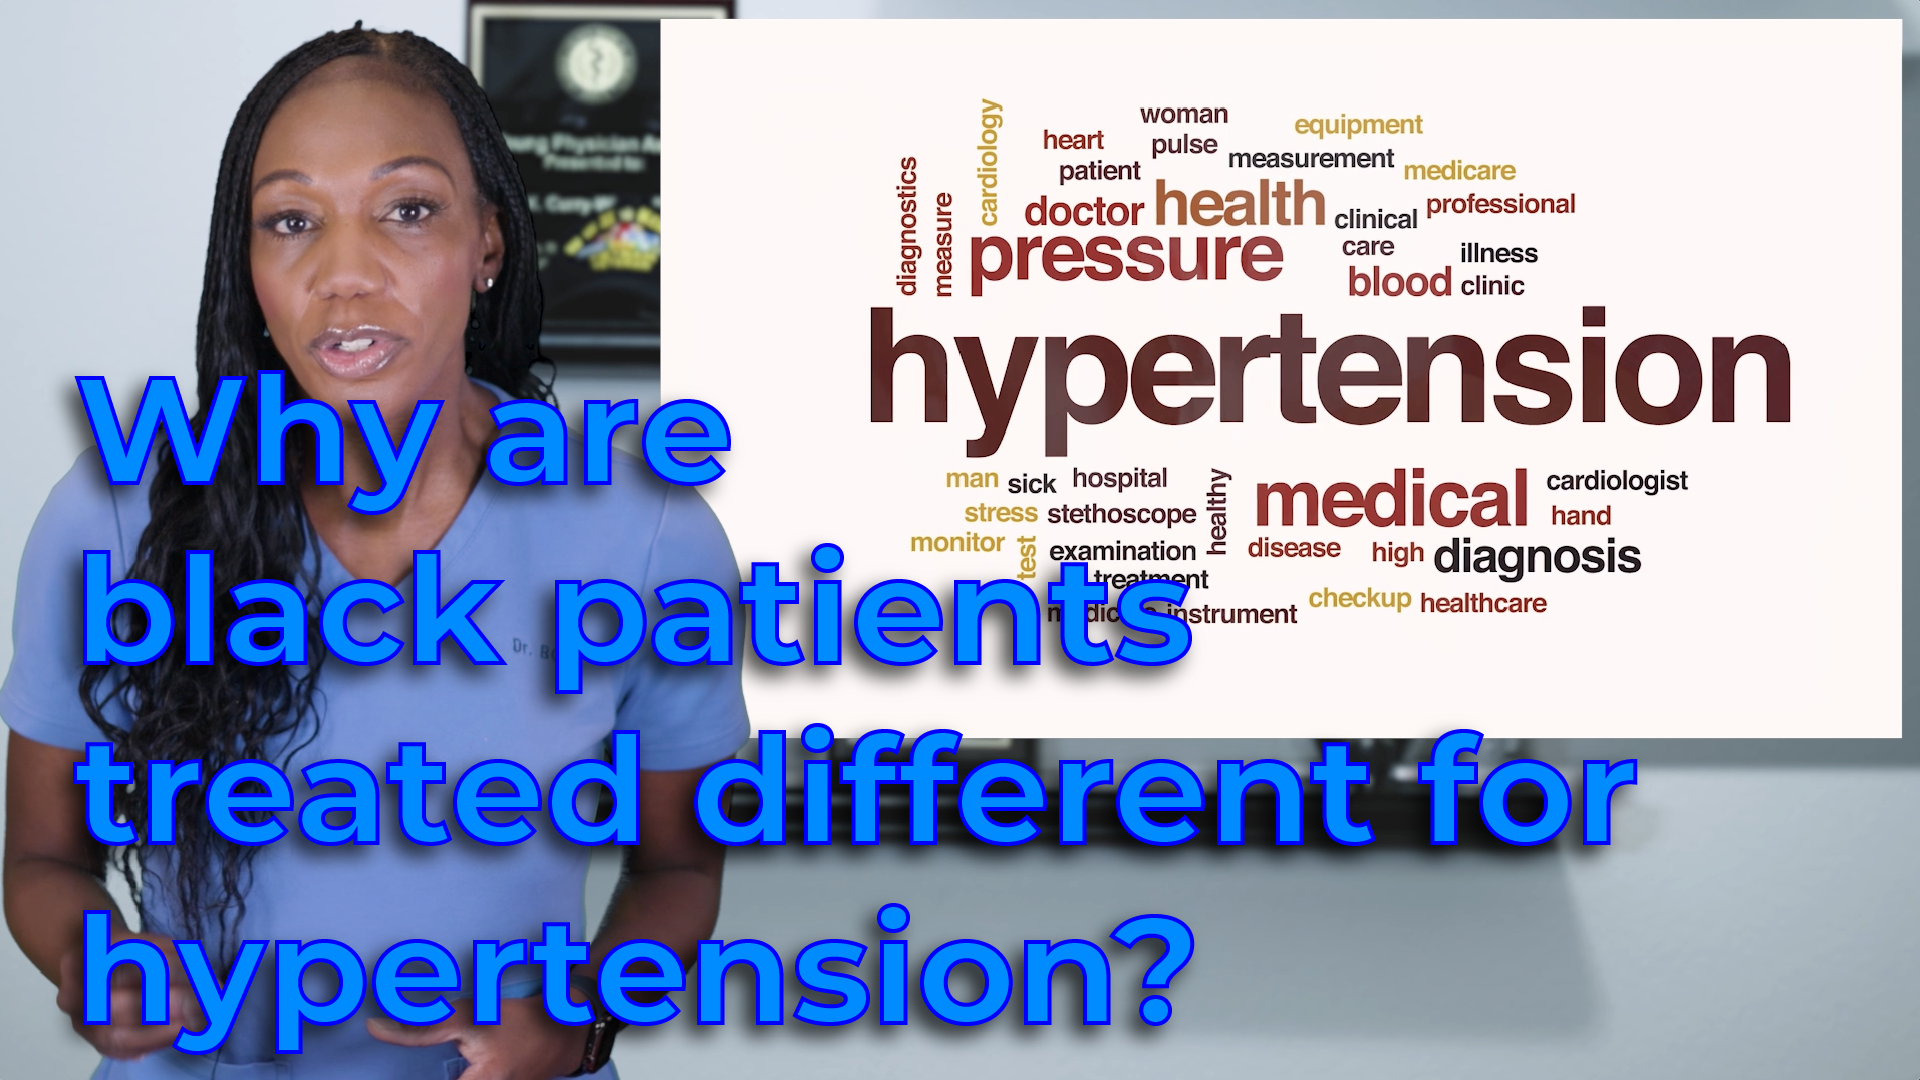 Black patients treated different for hypertension?